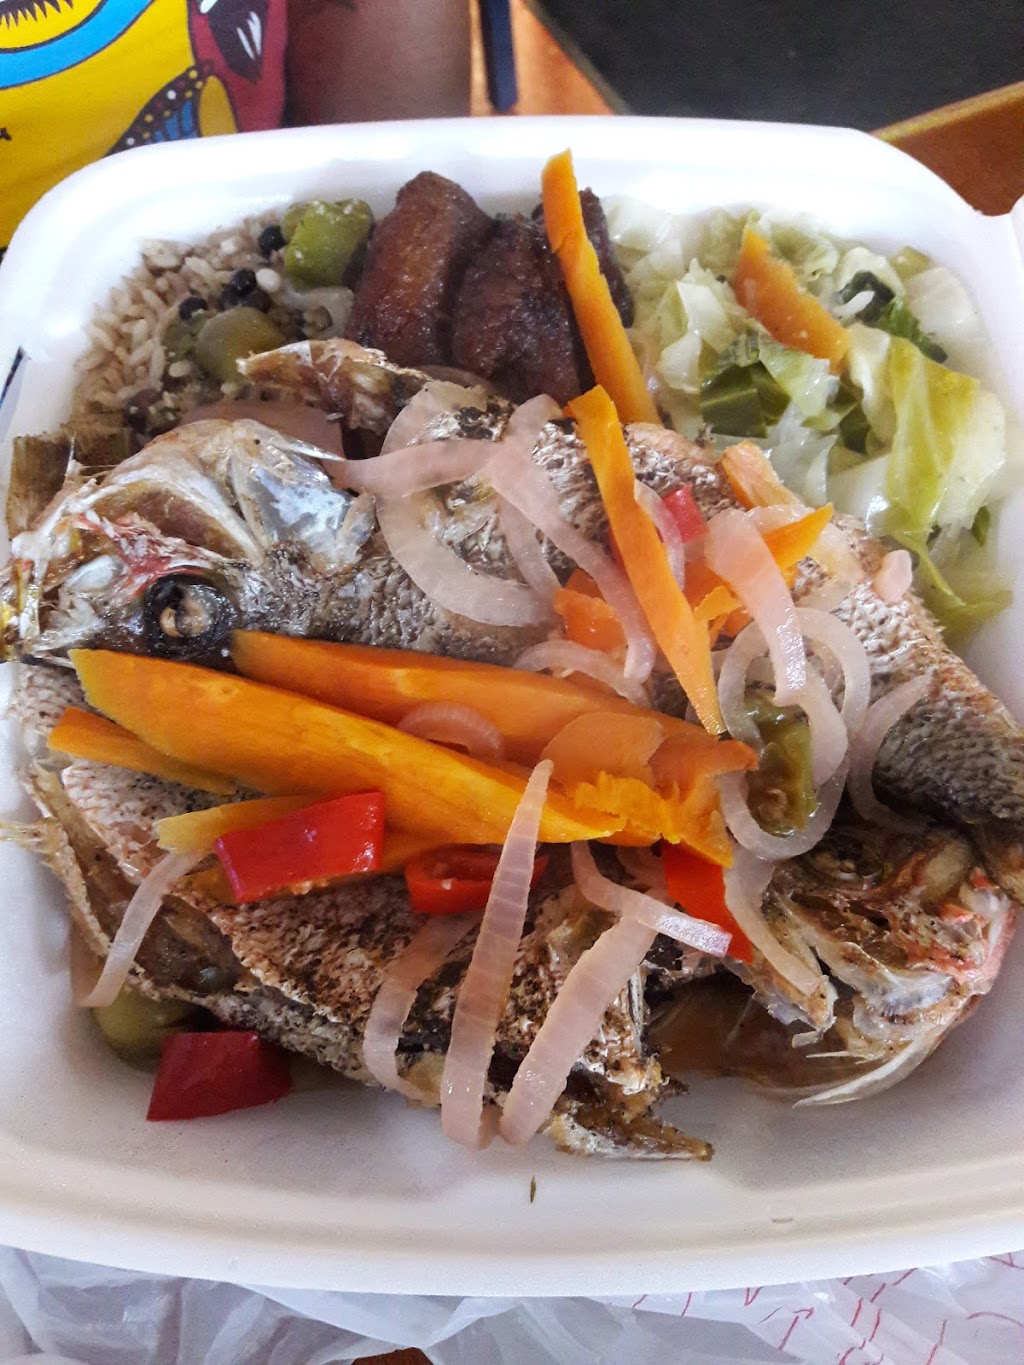 ISLAND VIBES CARIBBEAN KITCHEN AND CATERING | 1955 HWY 138 NE, Suite 1000, Conyers, GA 30013 | Phone: (770) 679-0793